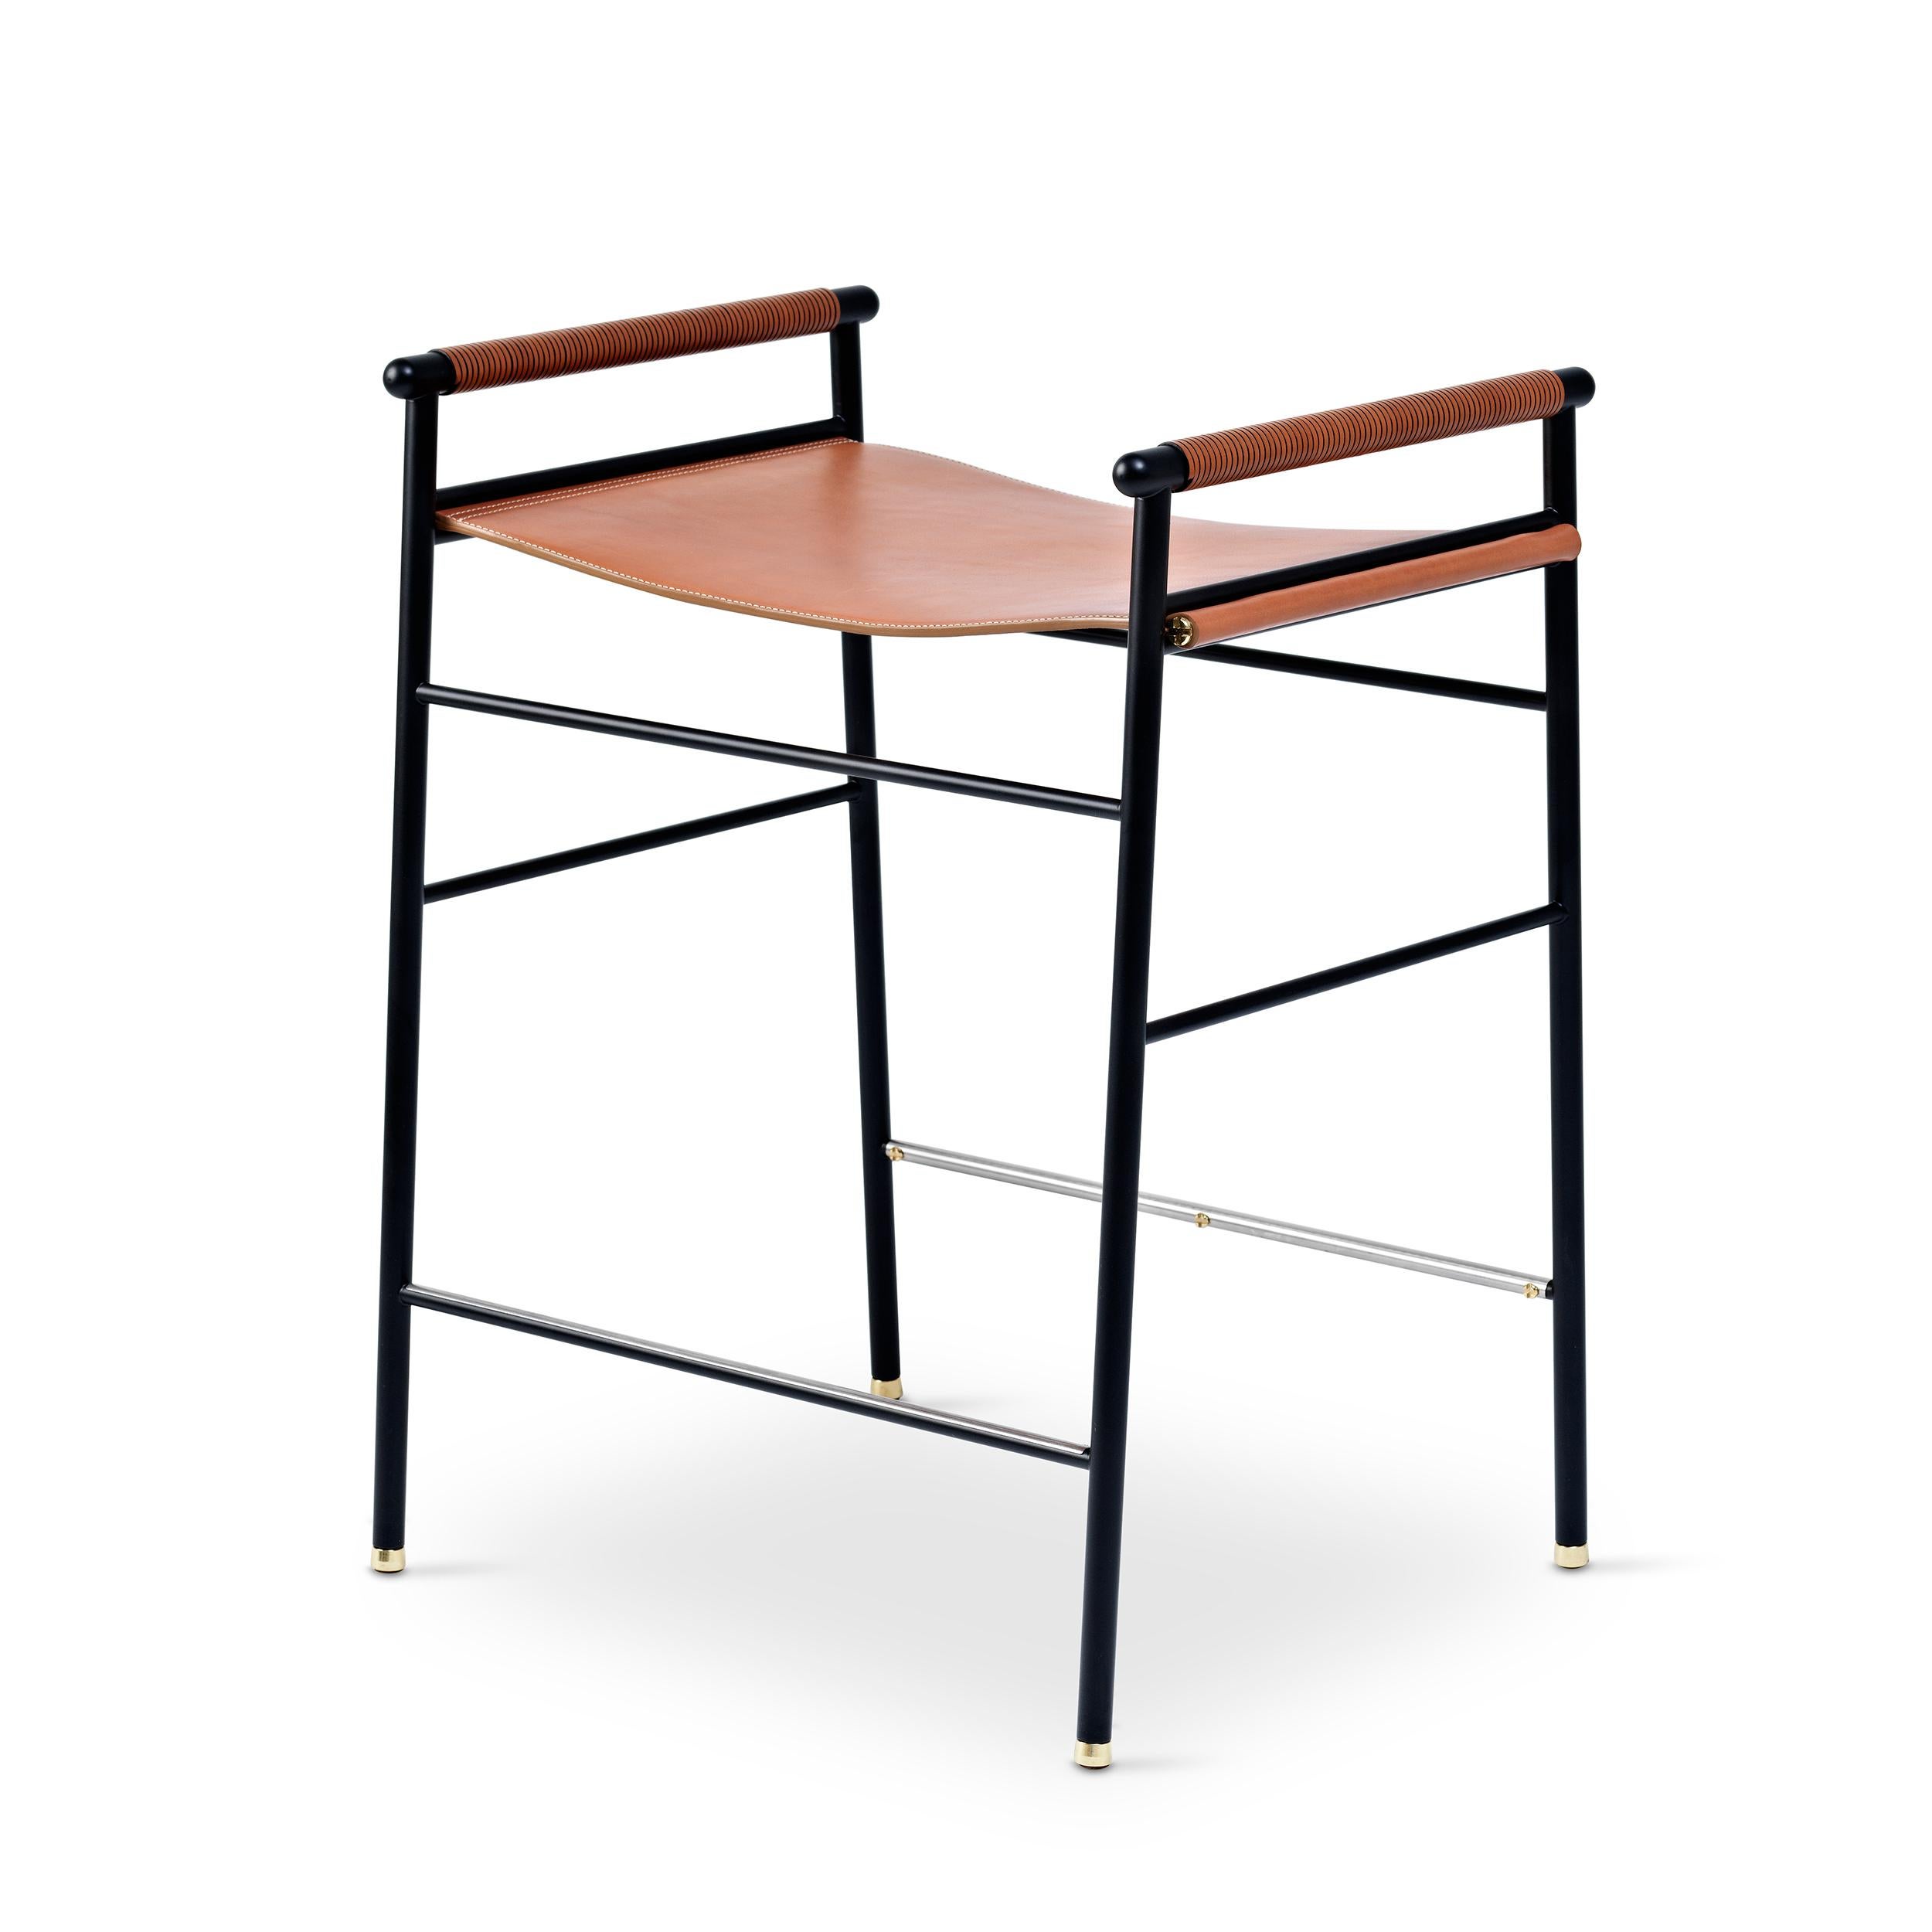 The “Repose” contemporary counter stool belongs to a collection that revisit the director chair collection, serene pieces where exclusivity and precision are shown in small details such as the hand-turned metal nuts and bolts that fix the leather